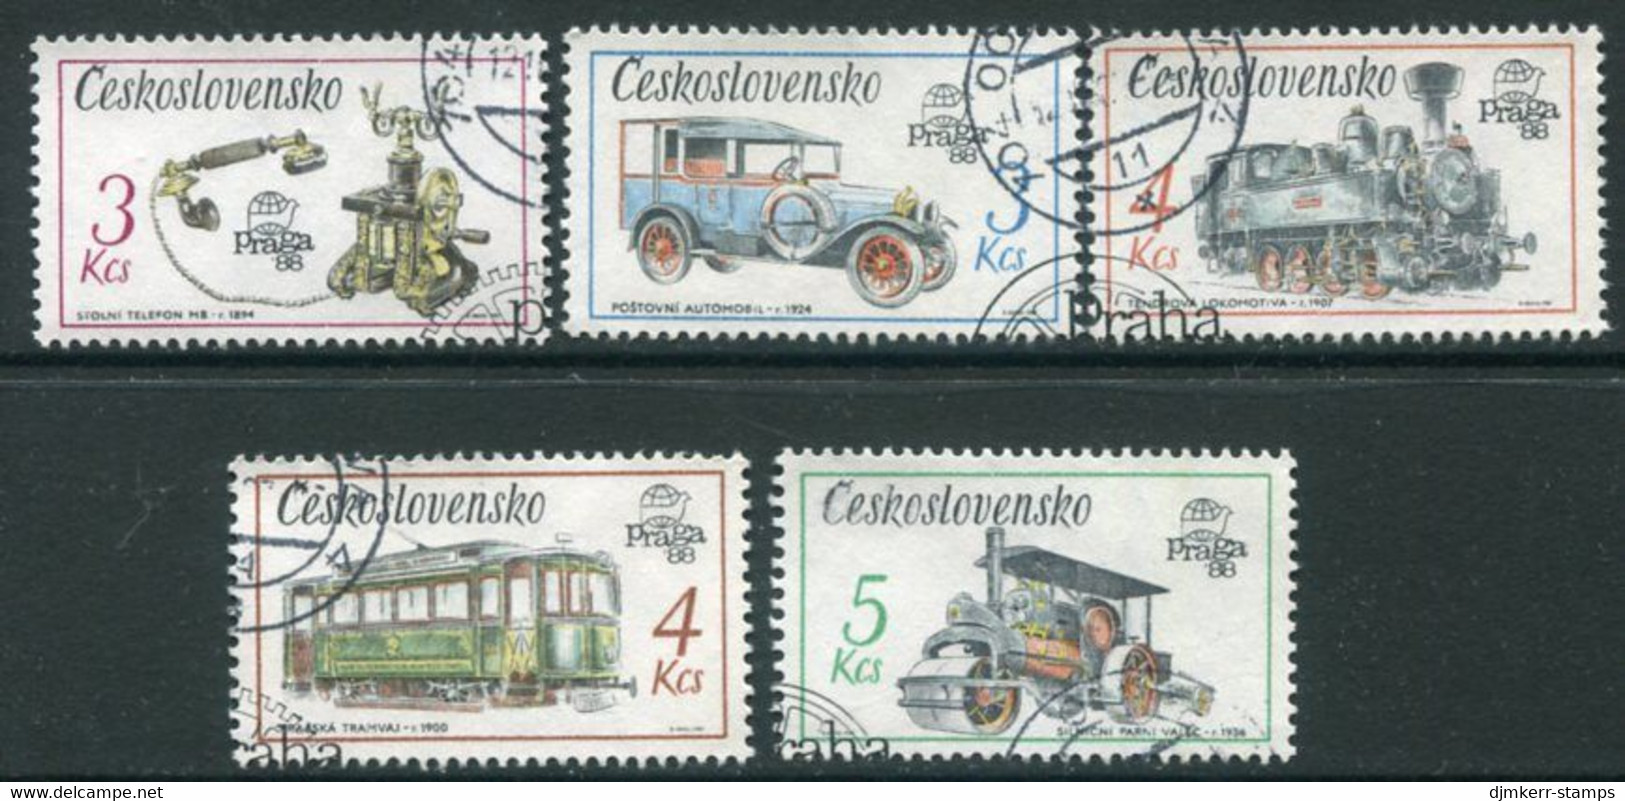 CZECHOSLOVAKIA 1987 PRAGA 88 Technical Monuments Used.  Michel 2911-15 - Used Stamps